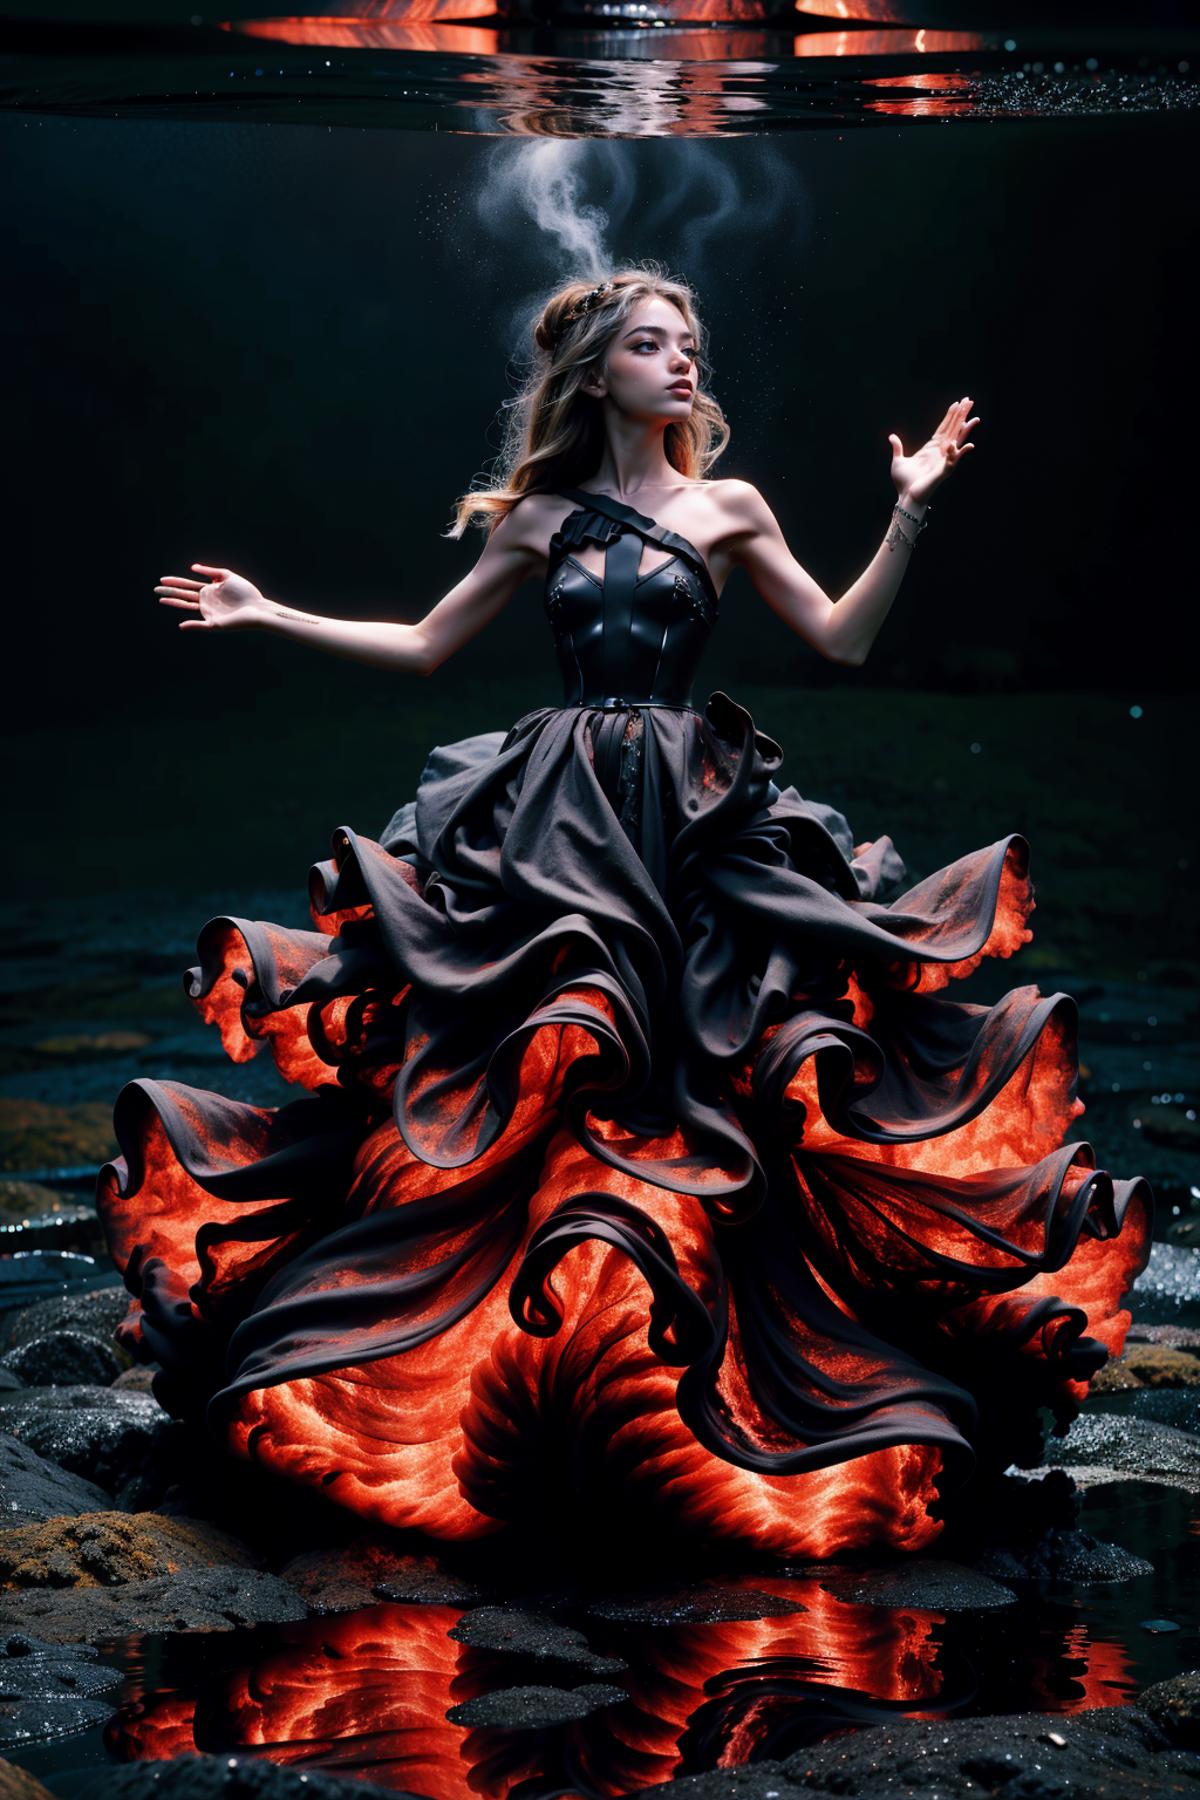 Lava Gown image by MadJoker